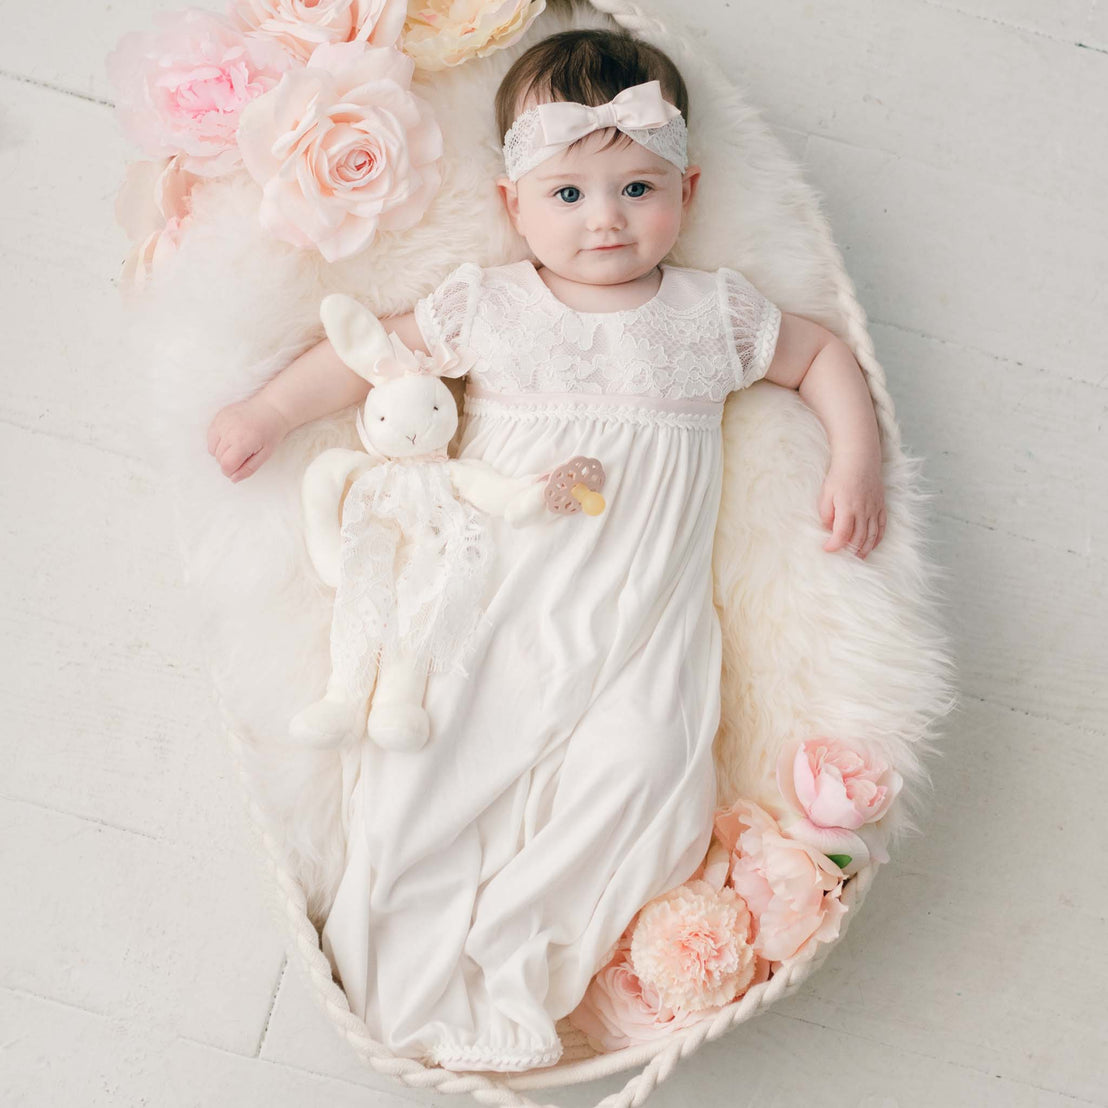 Flat lay photo of baby girl smiling wearing a cotton layette gown and the Victoria lace christening headband with bow.